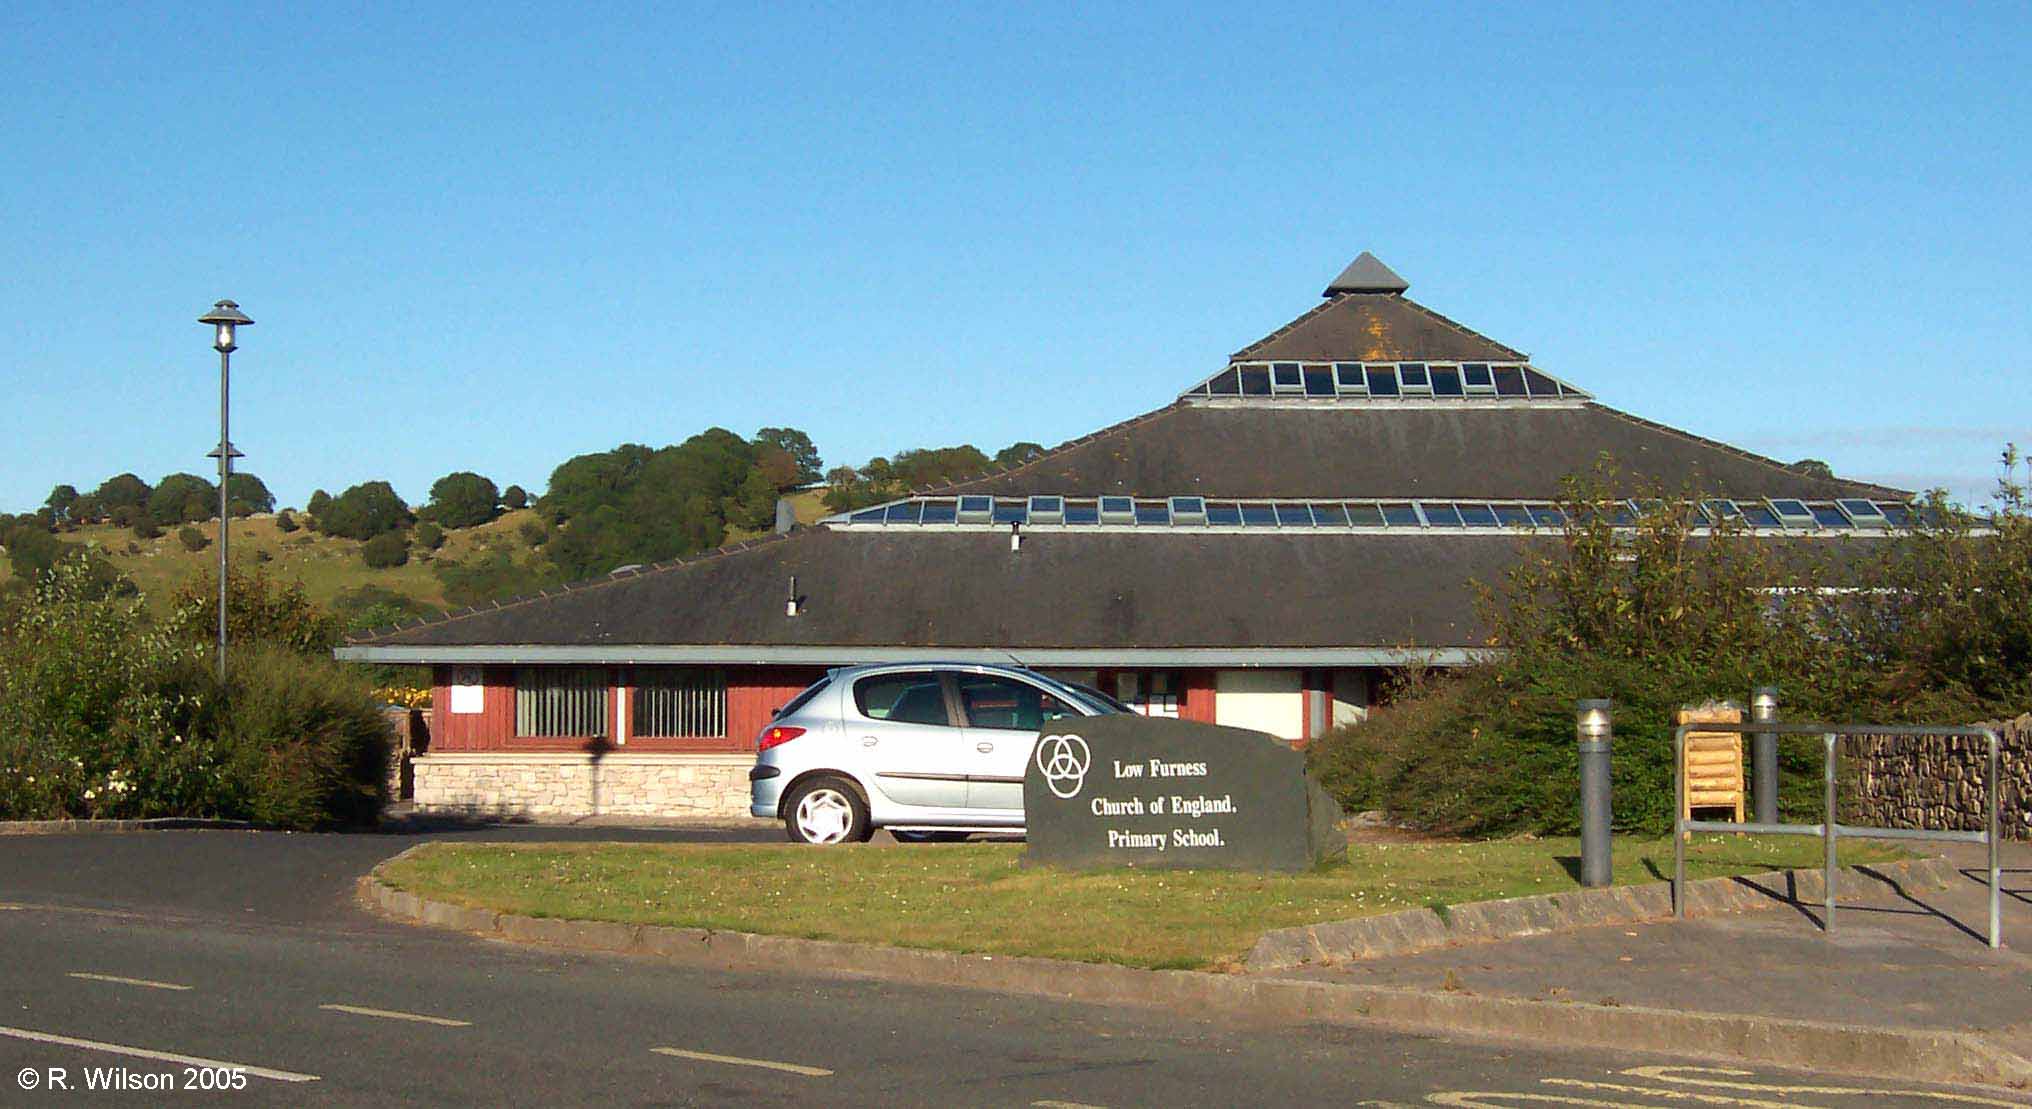 Low Furness Church of England Primary School